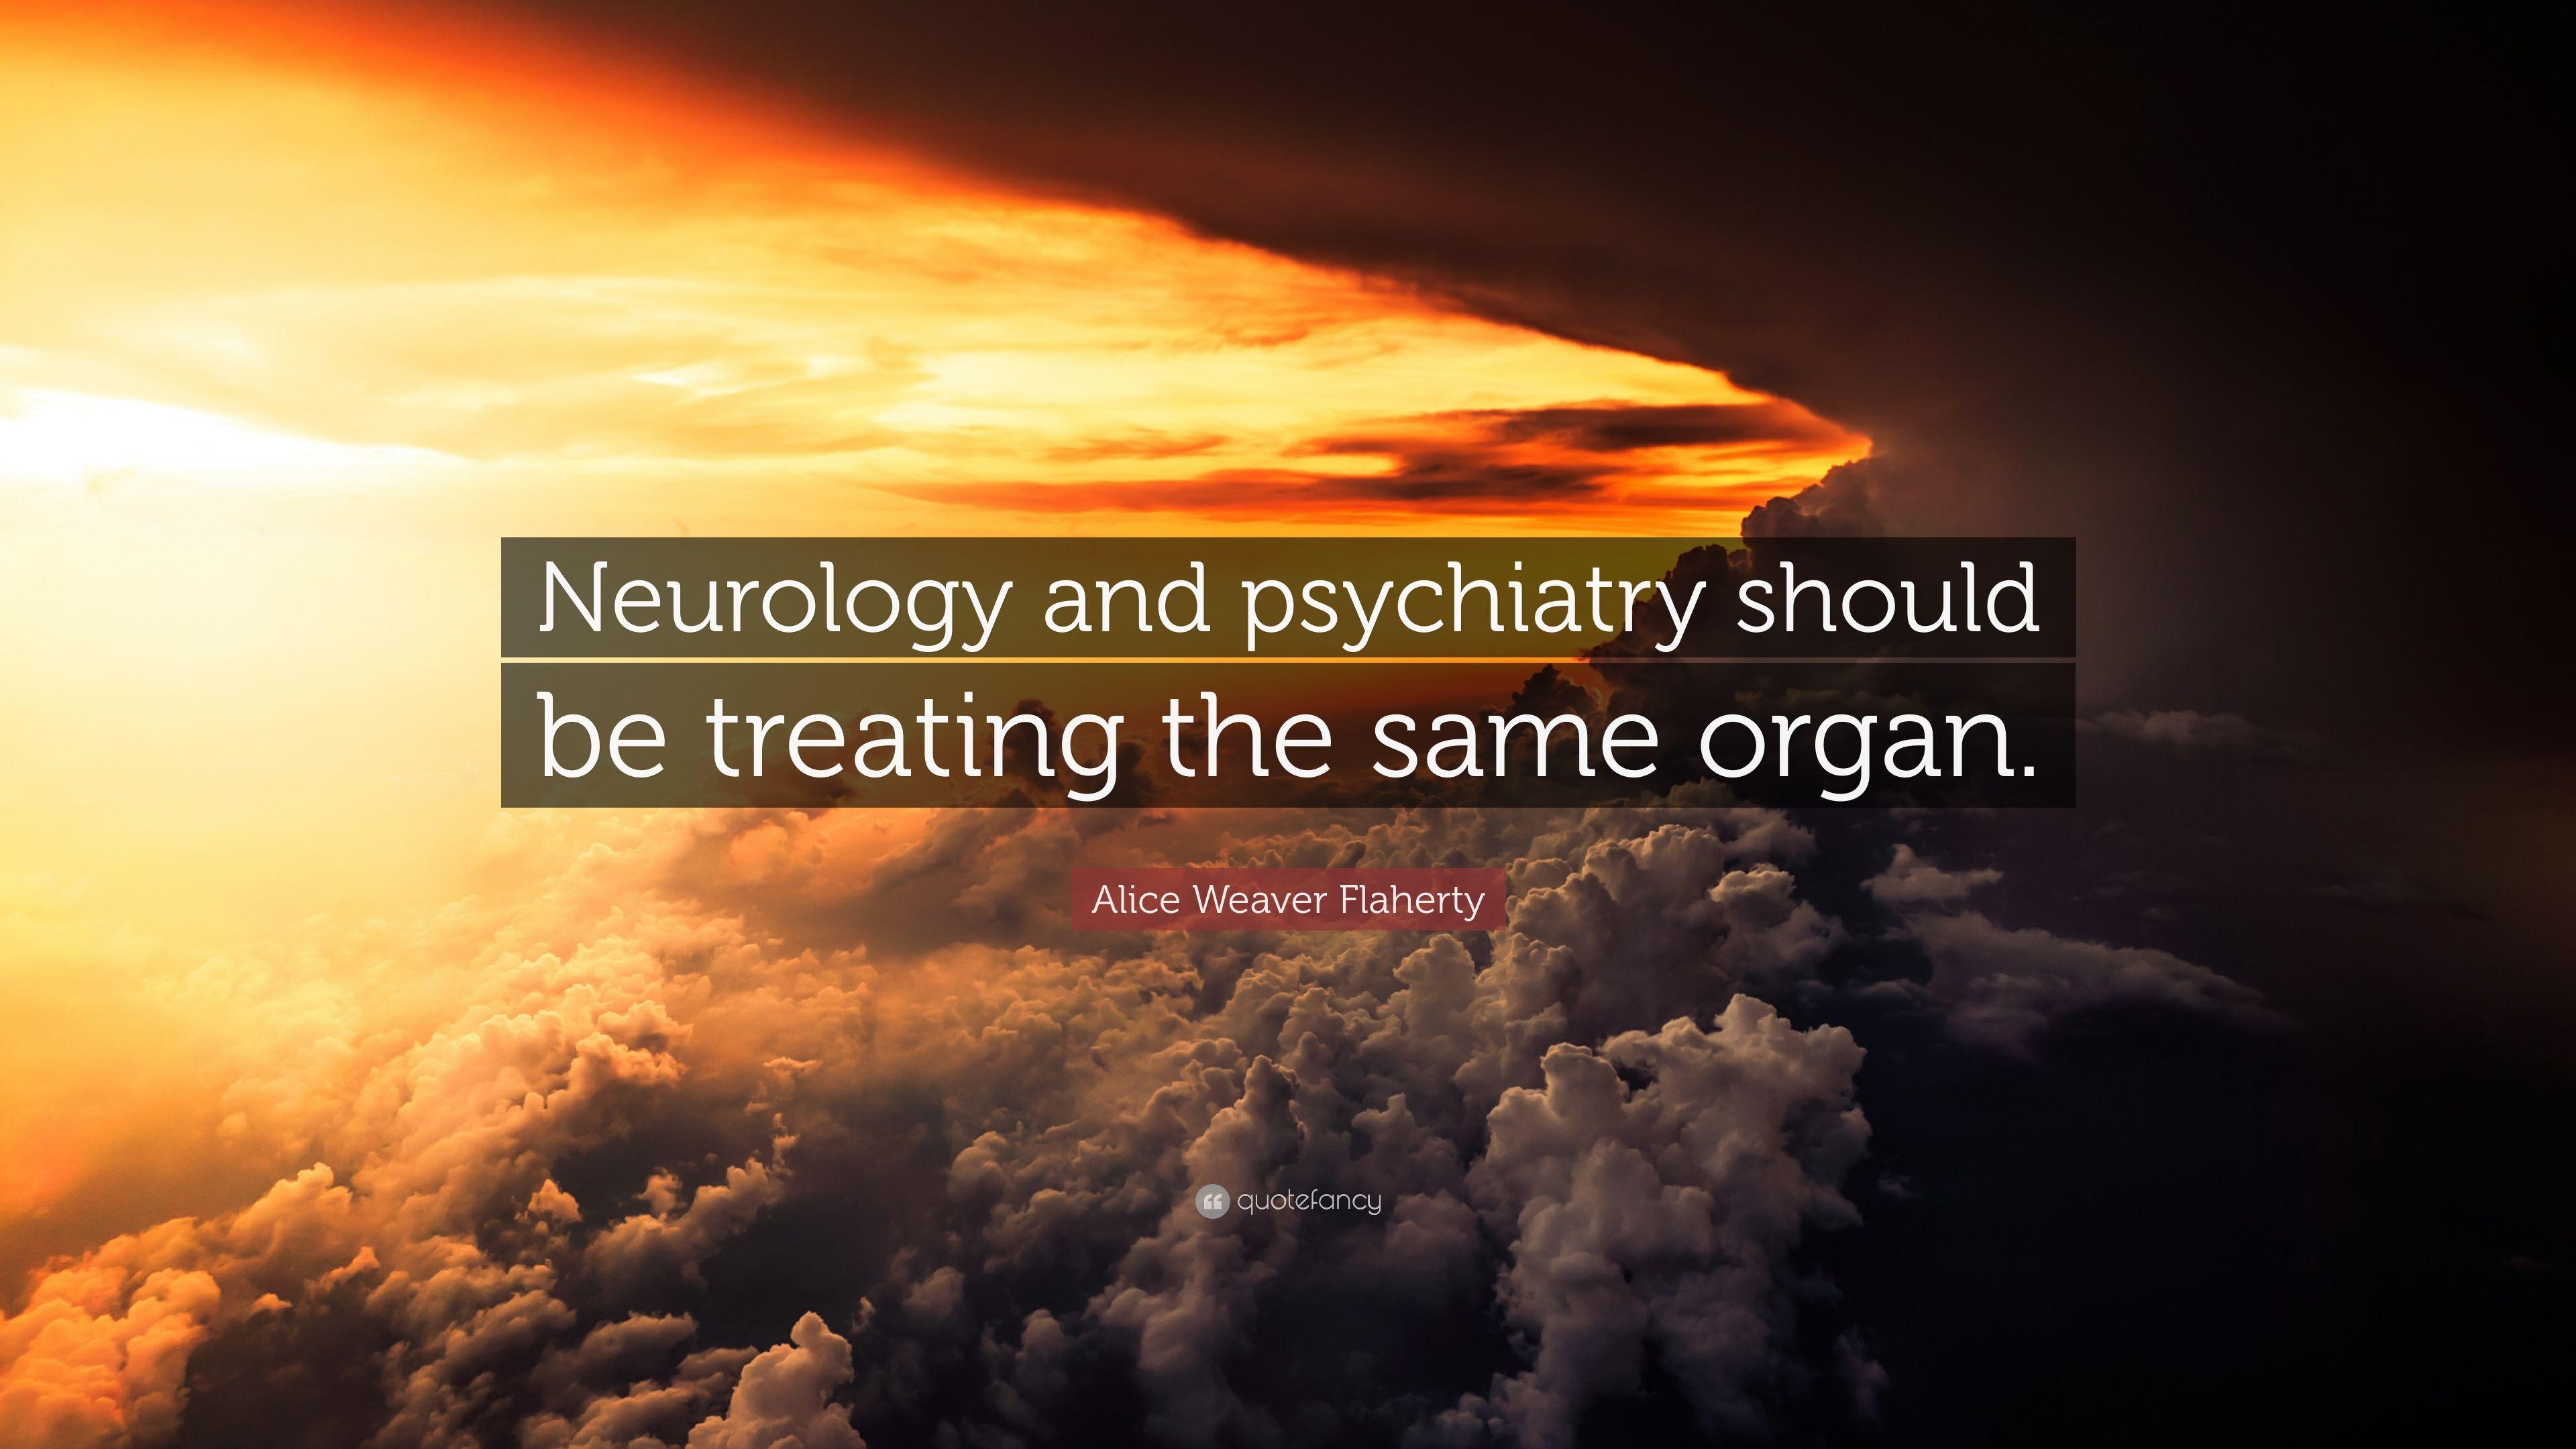 Alice Weaver Flaherty Quote: “Neurology and psychiatry should be